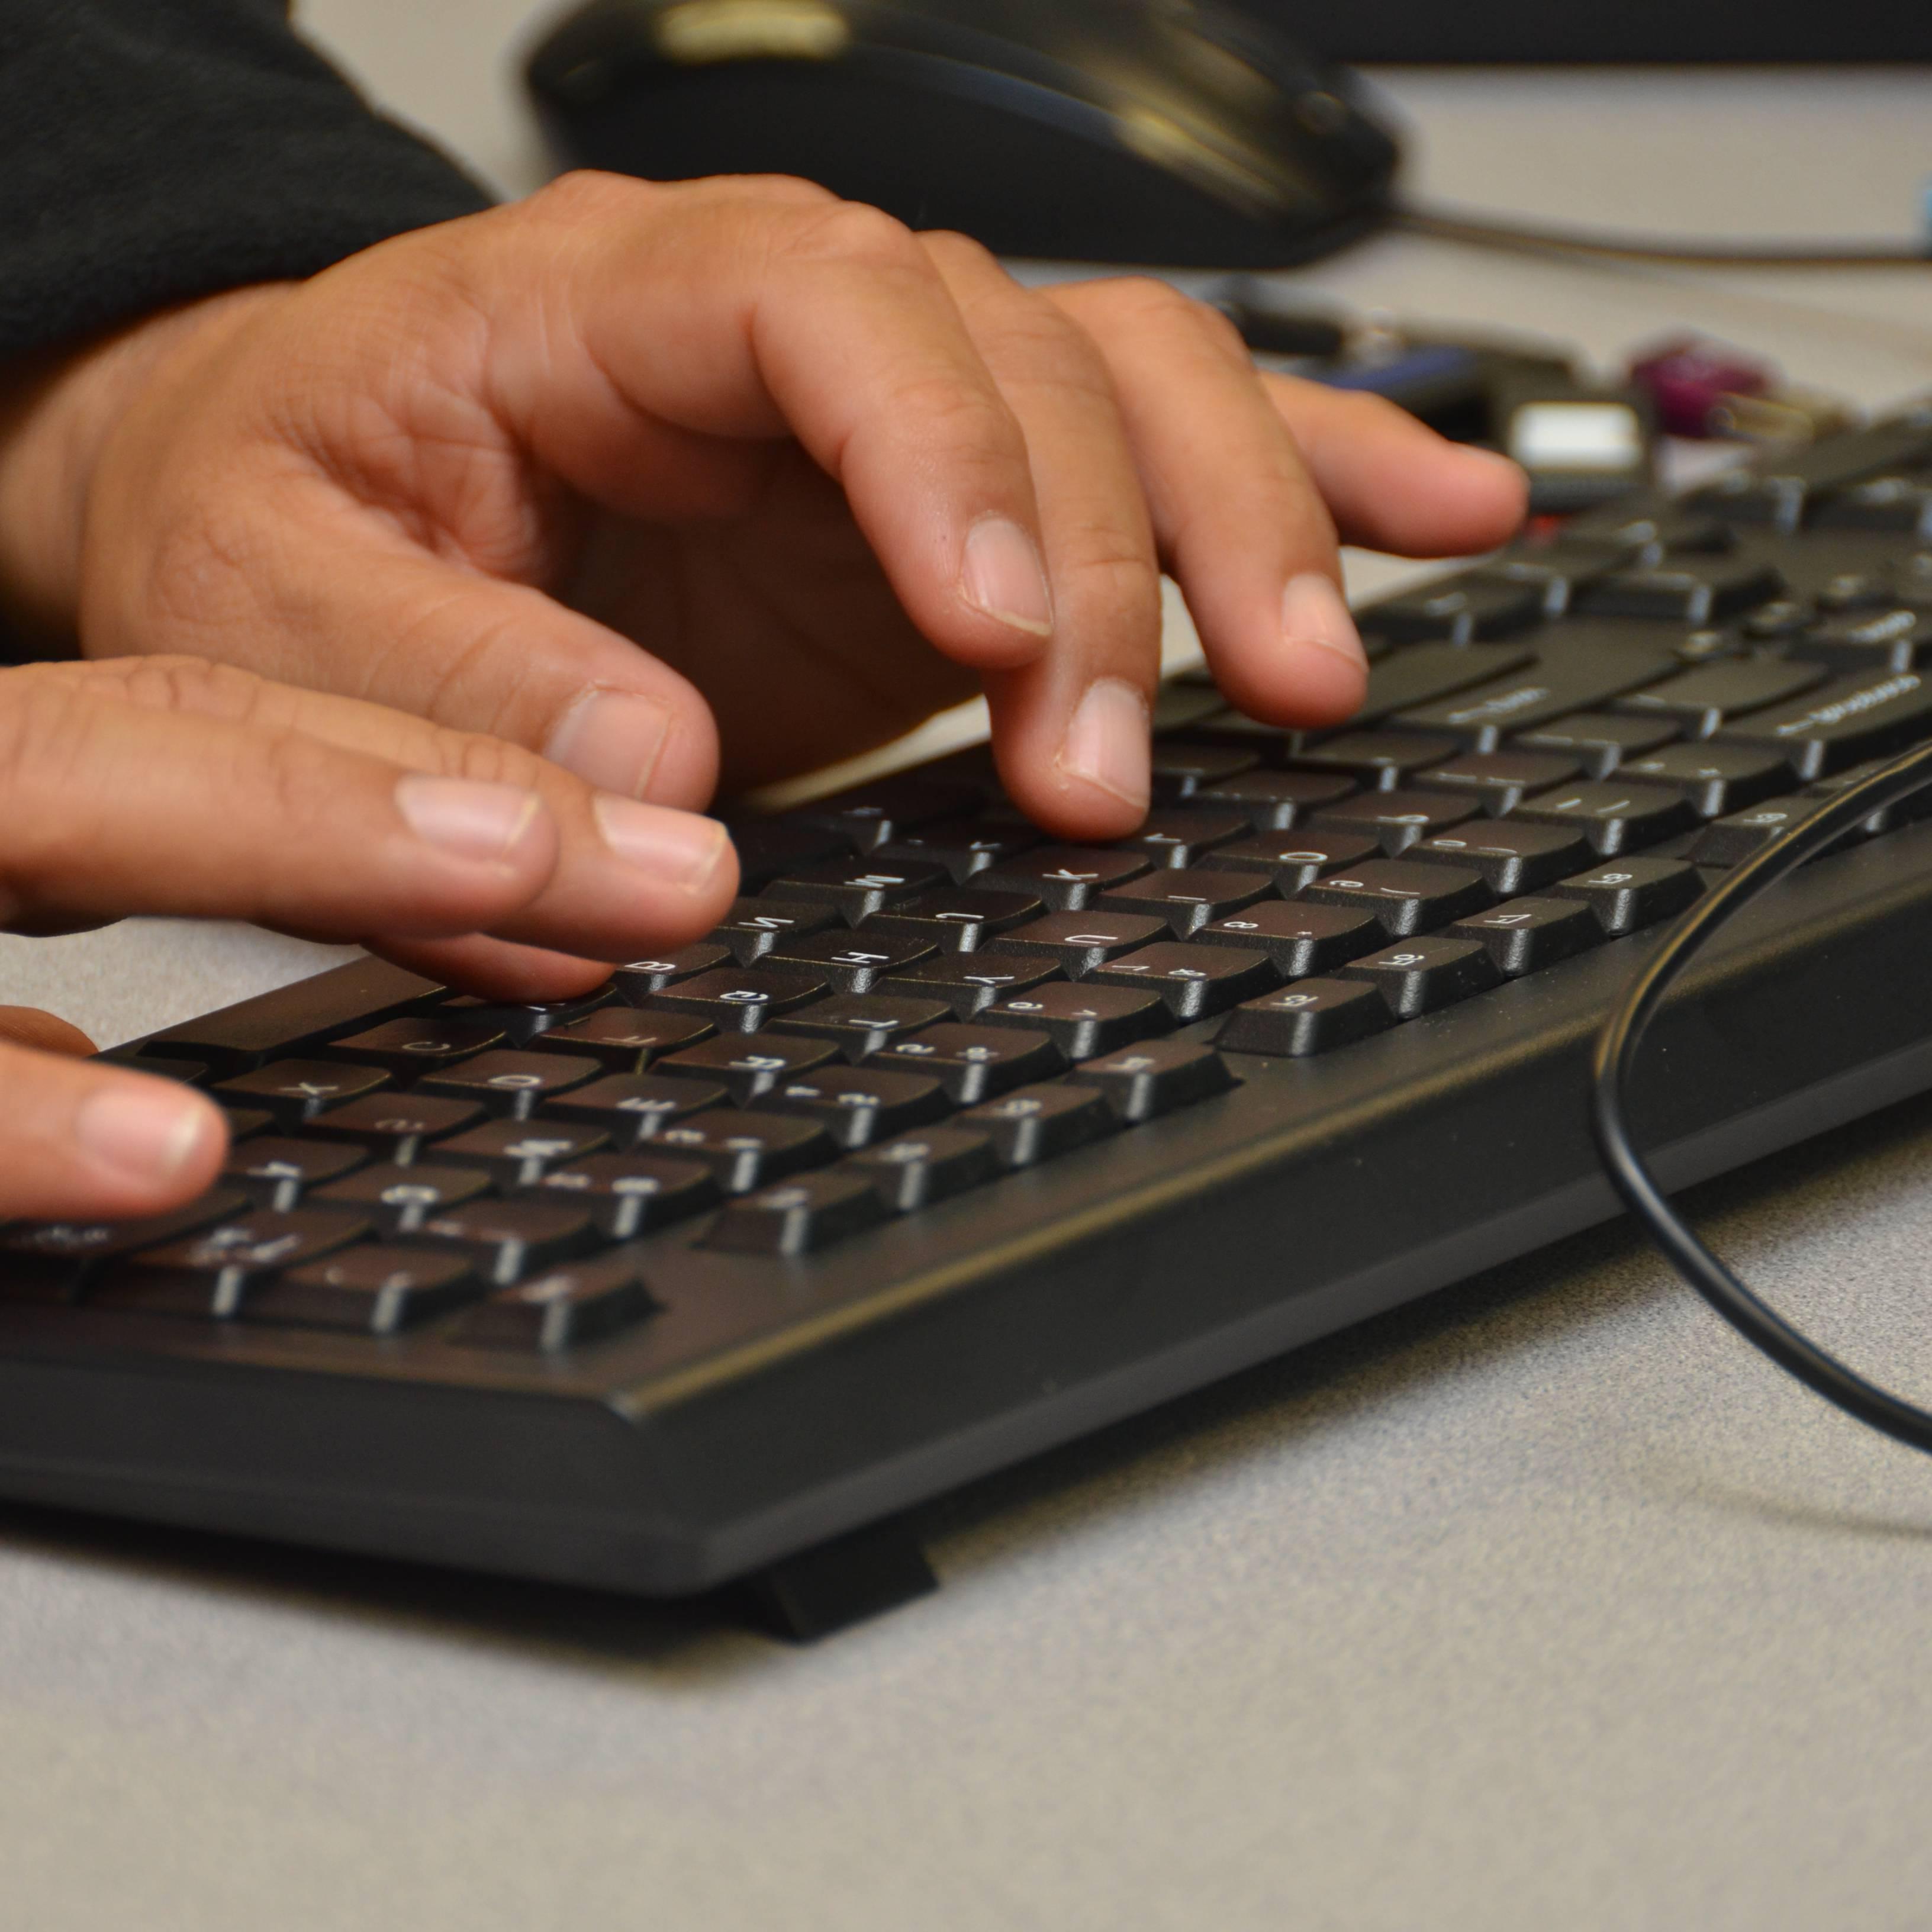 student typing on a keyboard